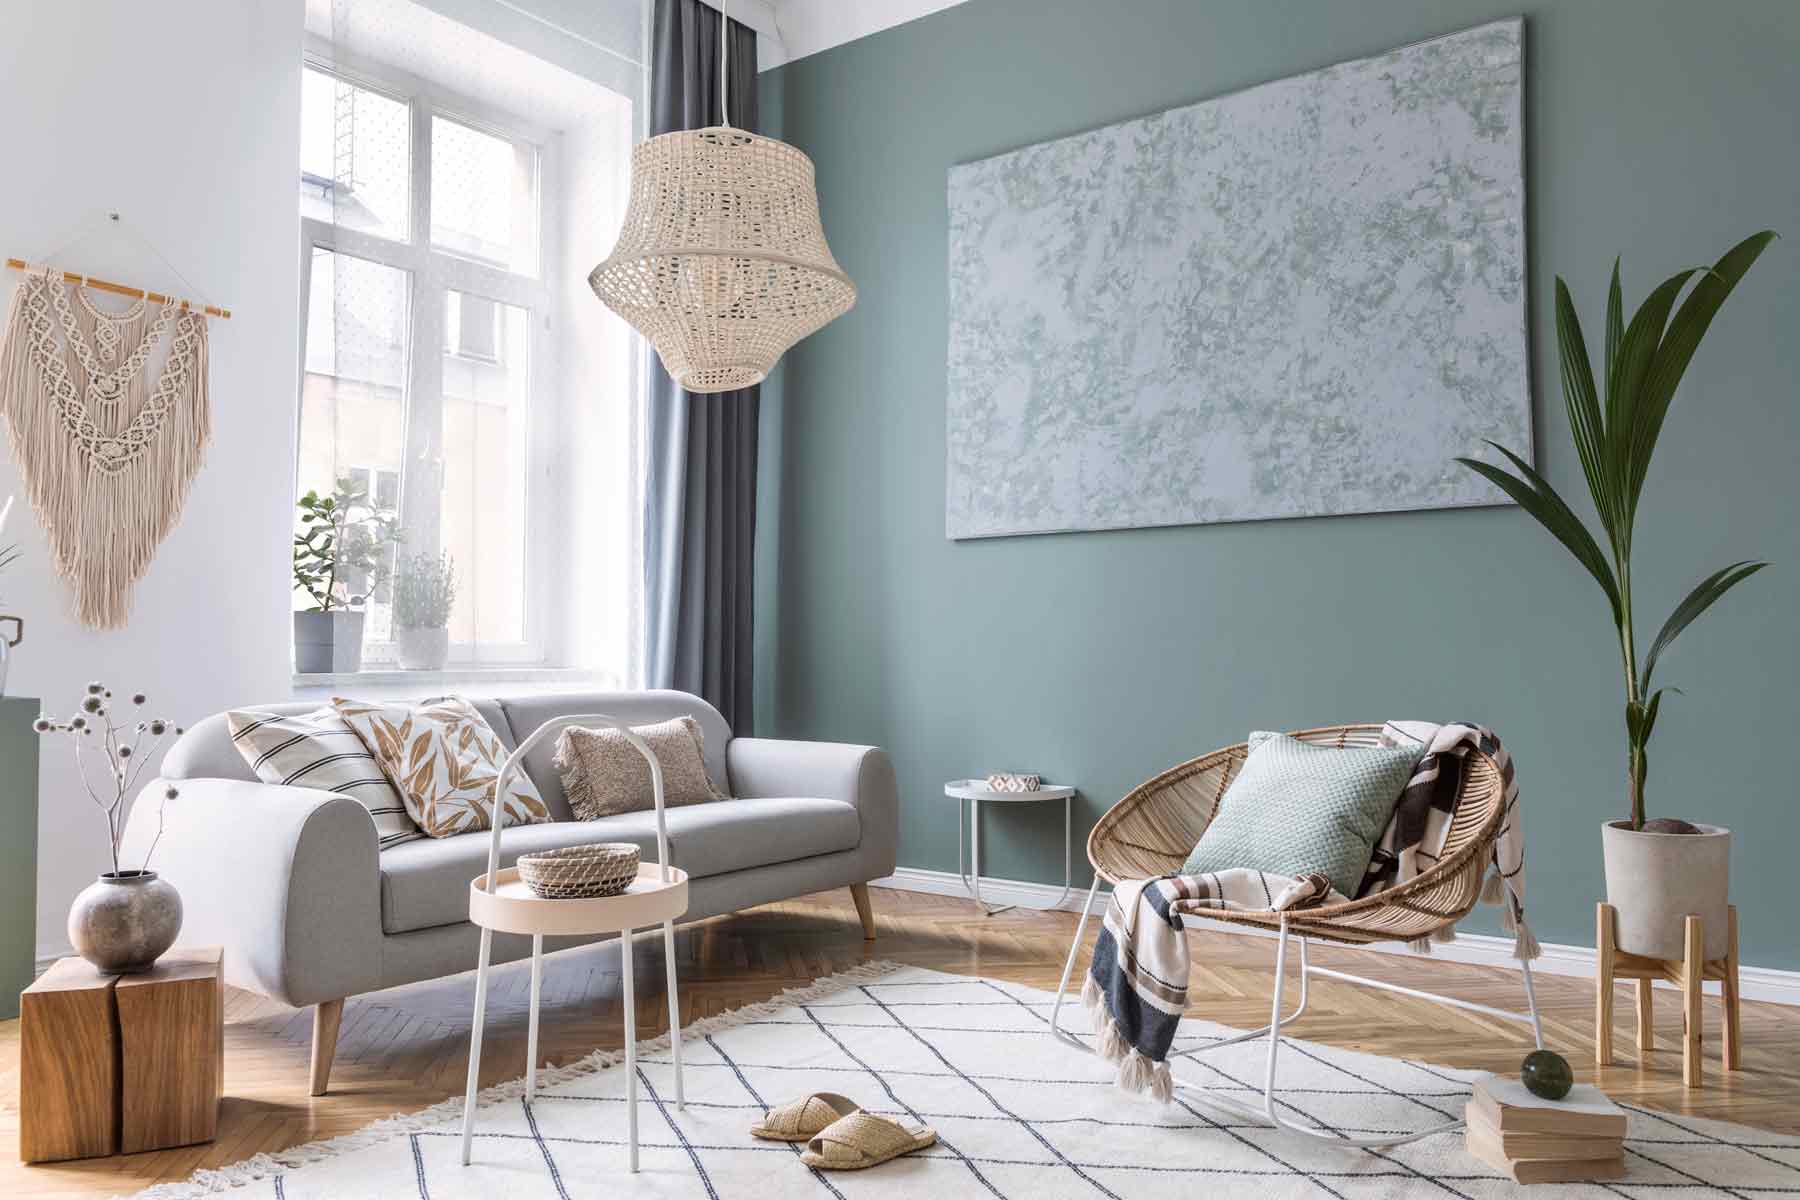 What Paint Finish Is Best For Living Room